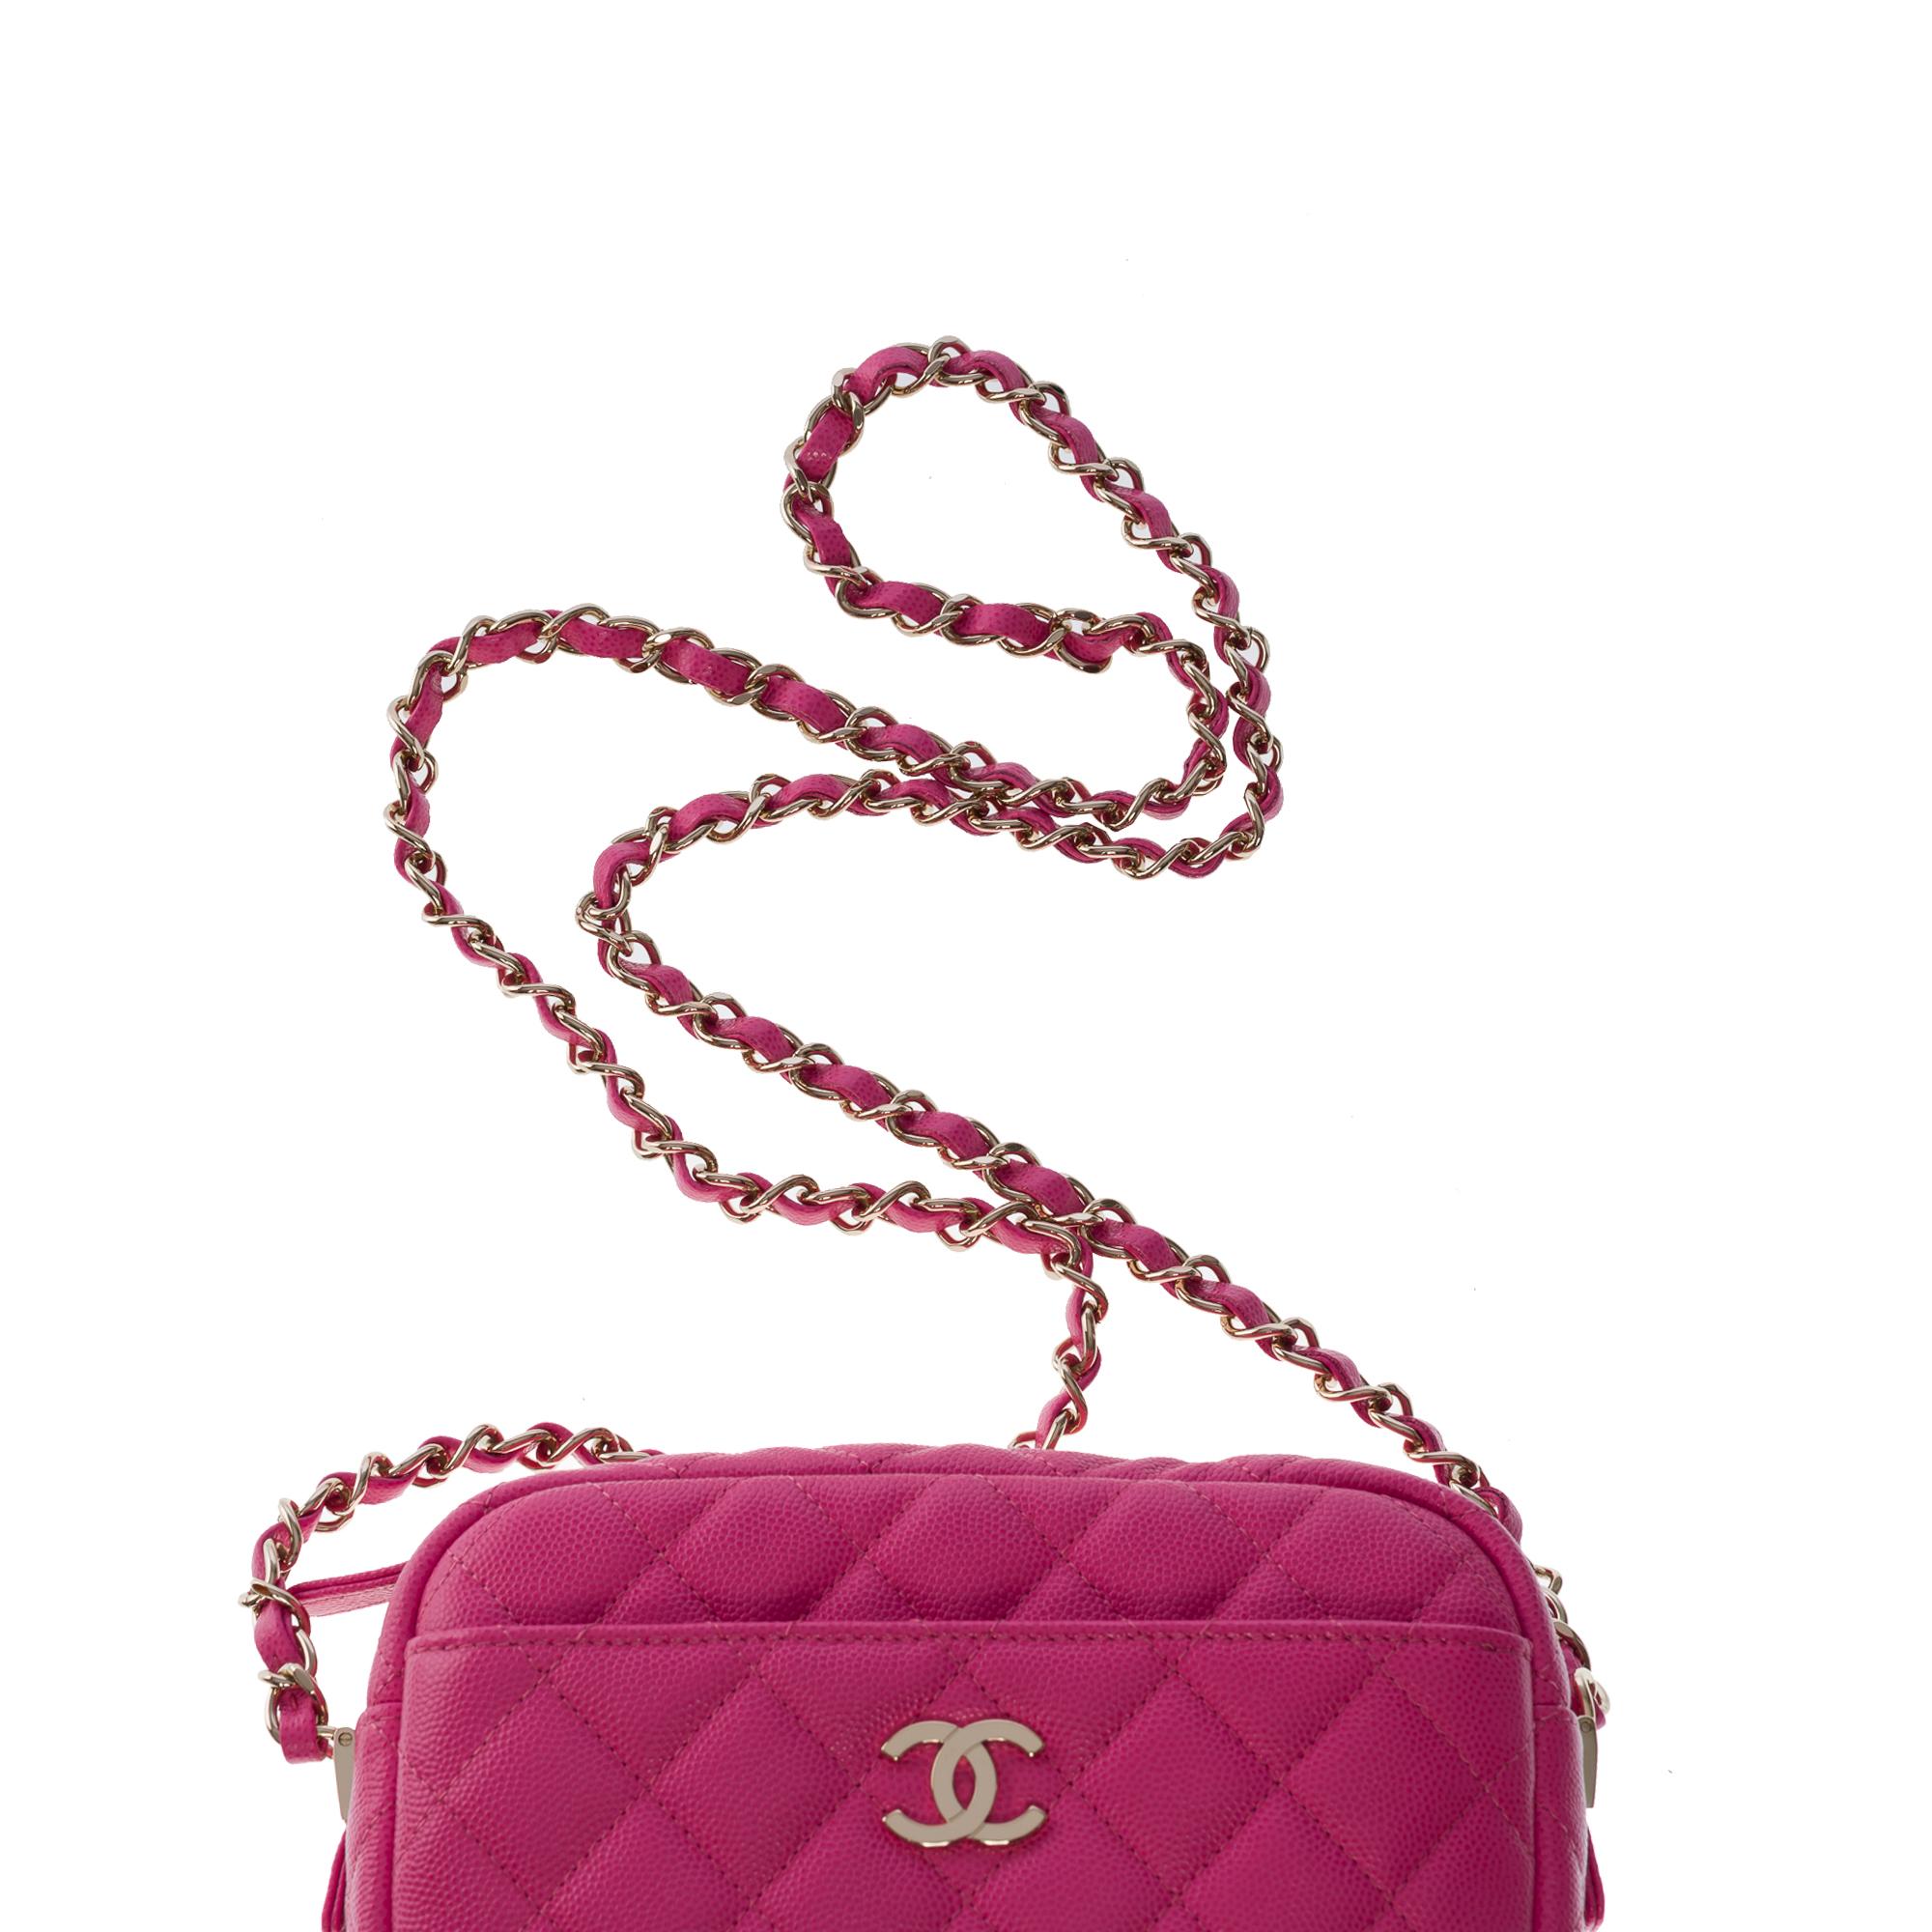 New- Amazing Chanel Mini Camera shoulder bag in Pink caviar leather, CHW 4